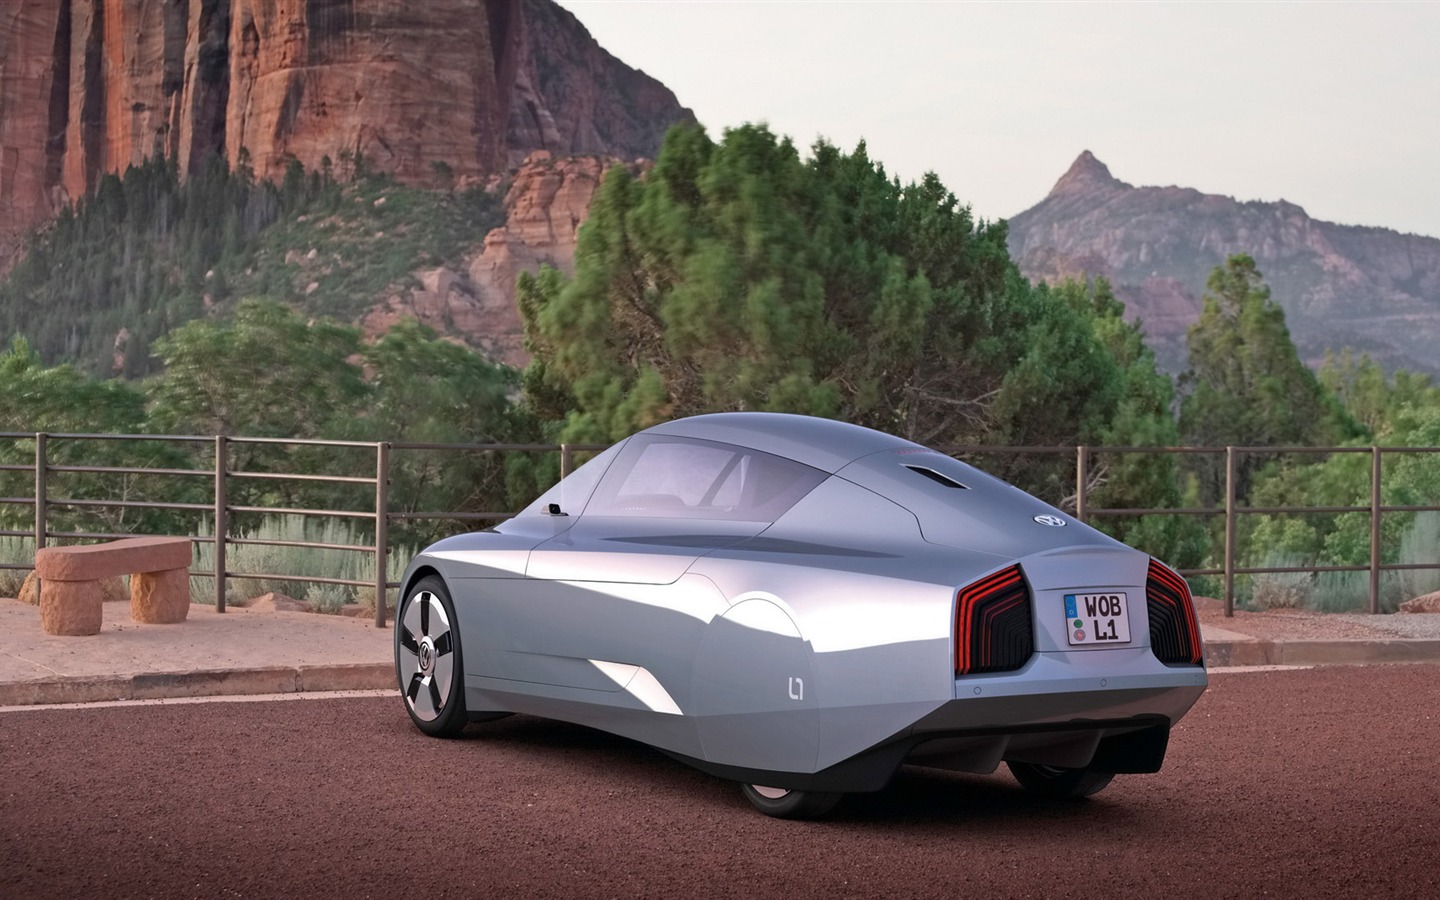 Volkswagen L1 Tapety Concept Car #12 - 1440x900